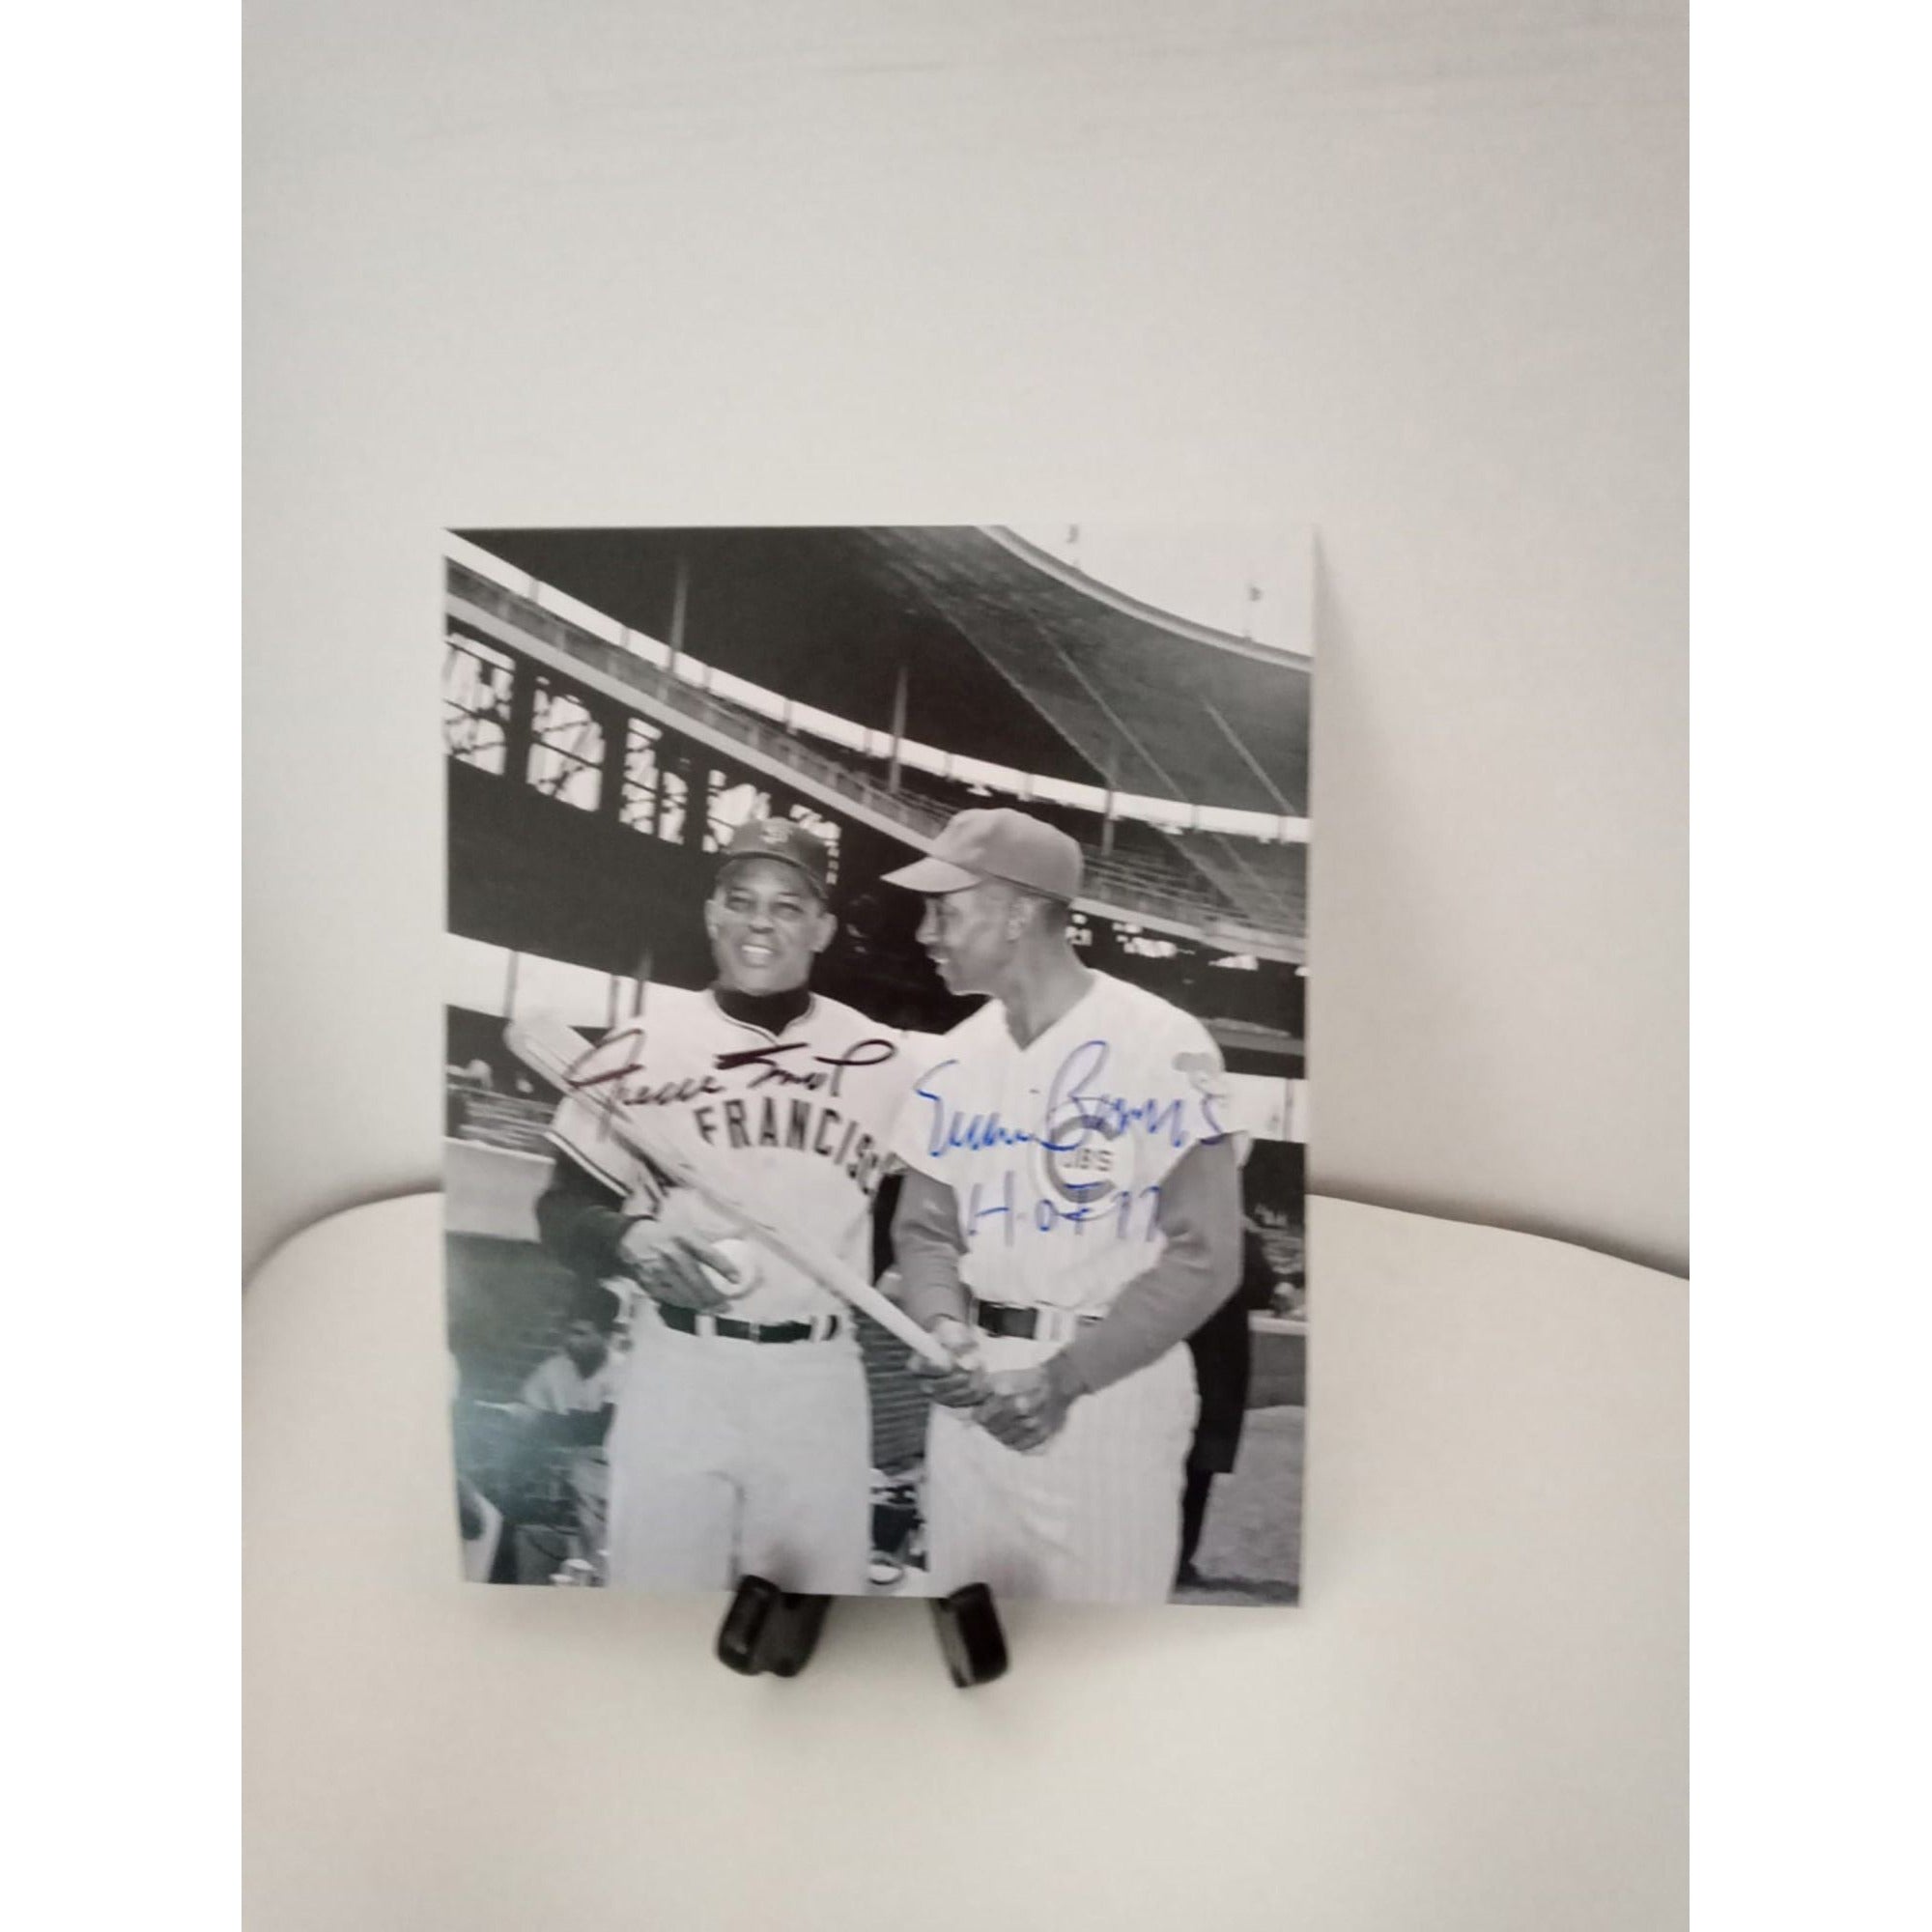 Willie Mays and Ernie Banks 8 by 10 photo signed